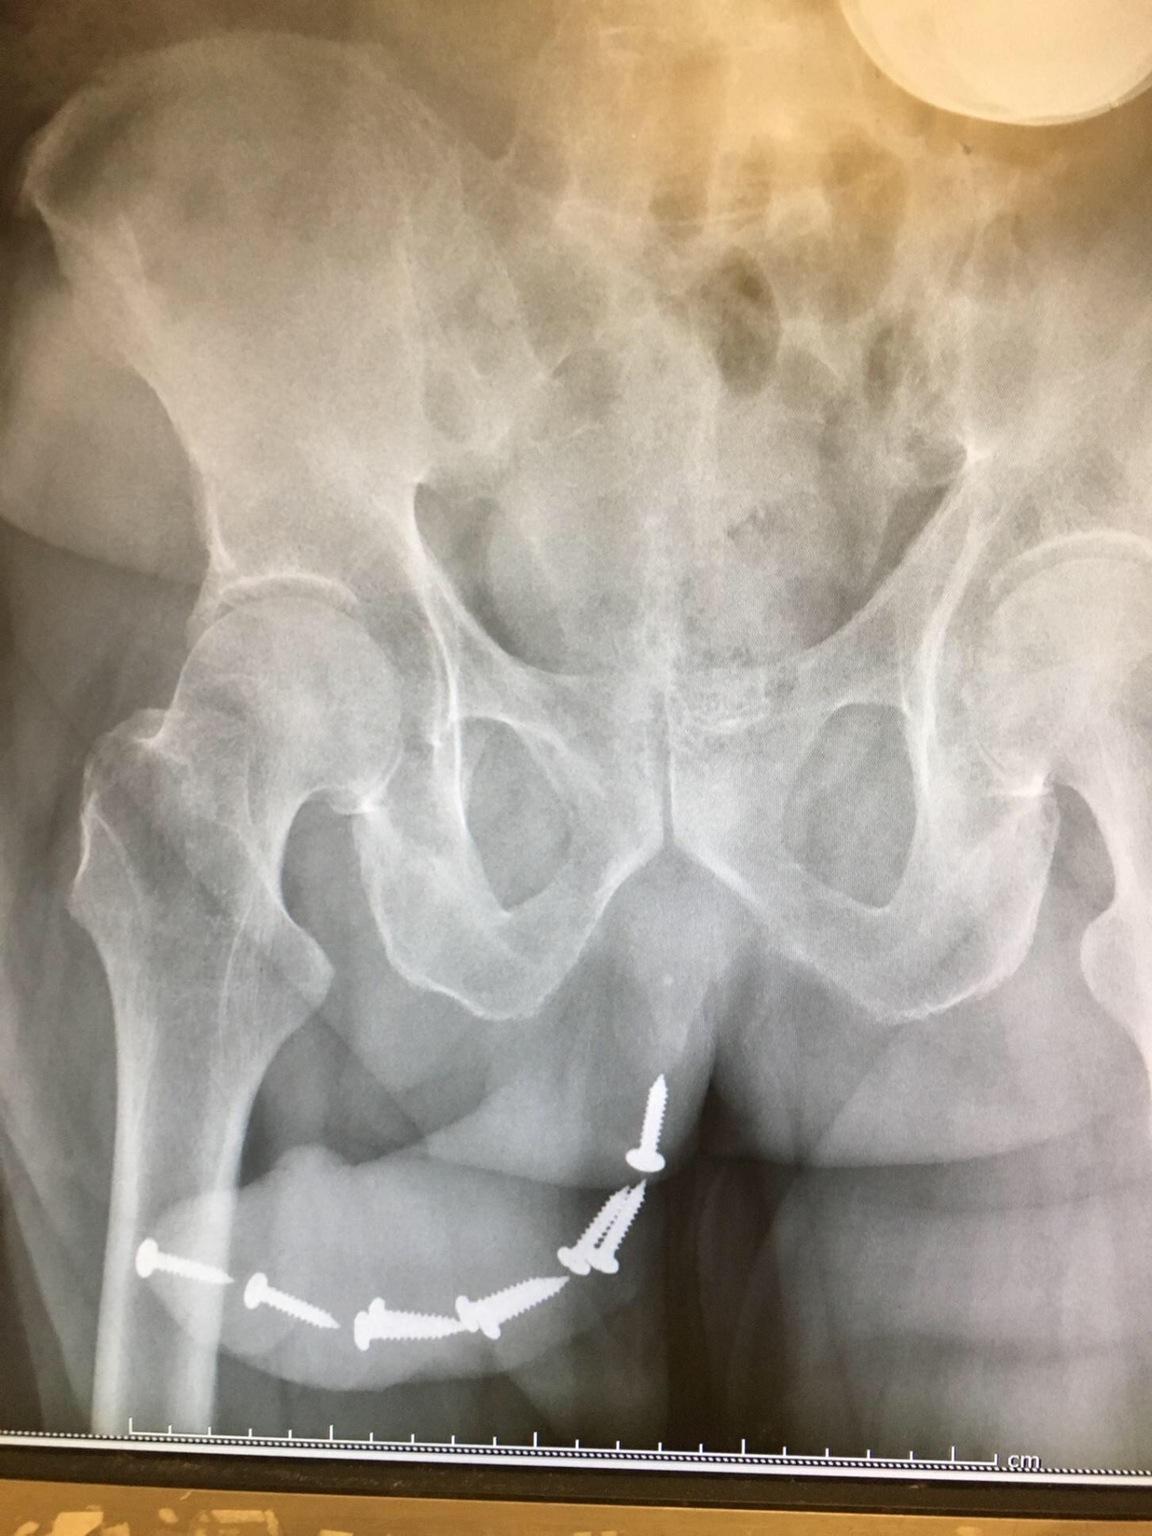 X-ray of angry woman who placed 7 screws into a man's urethra